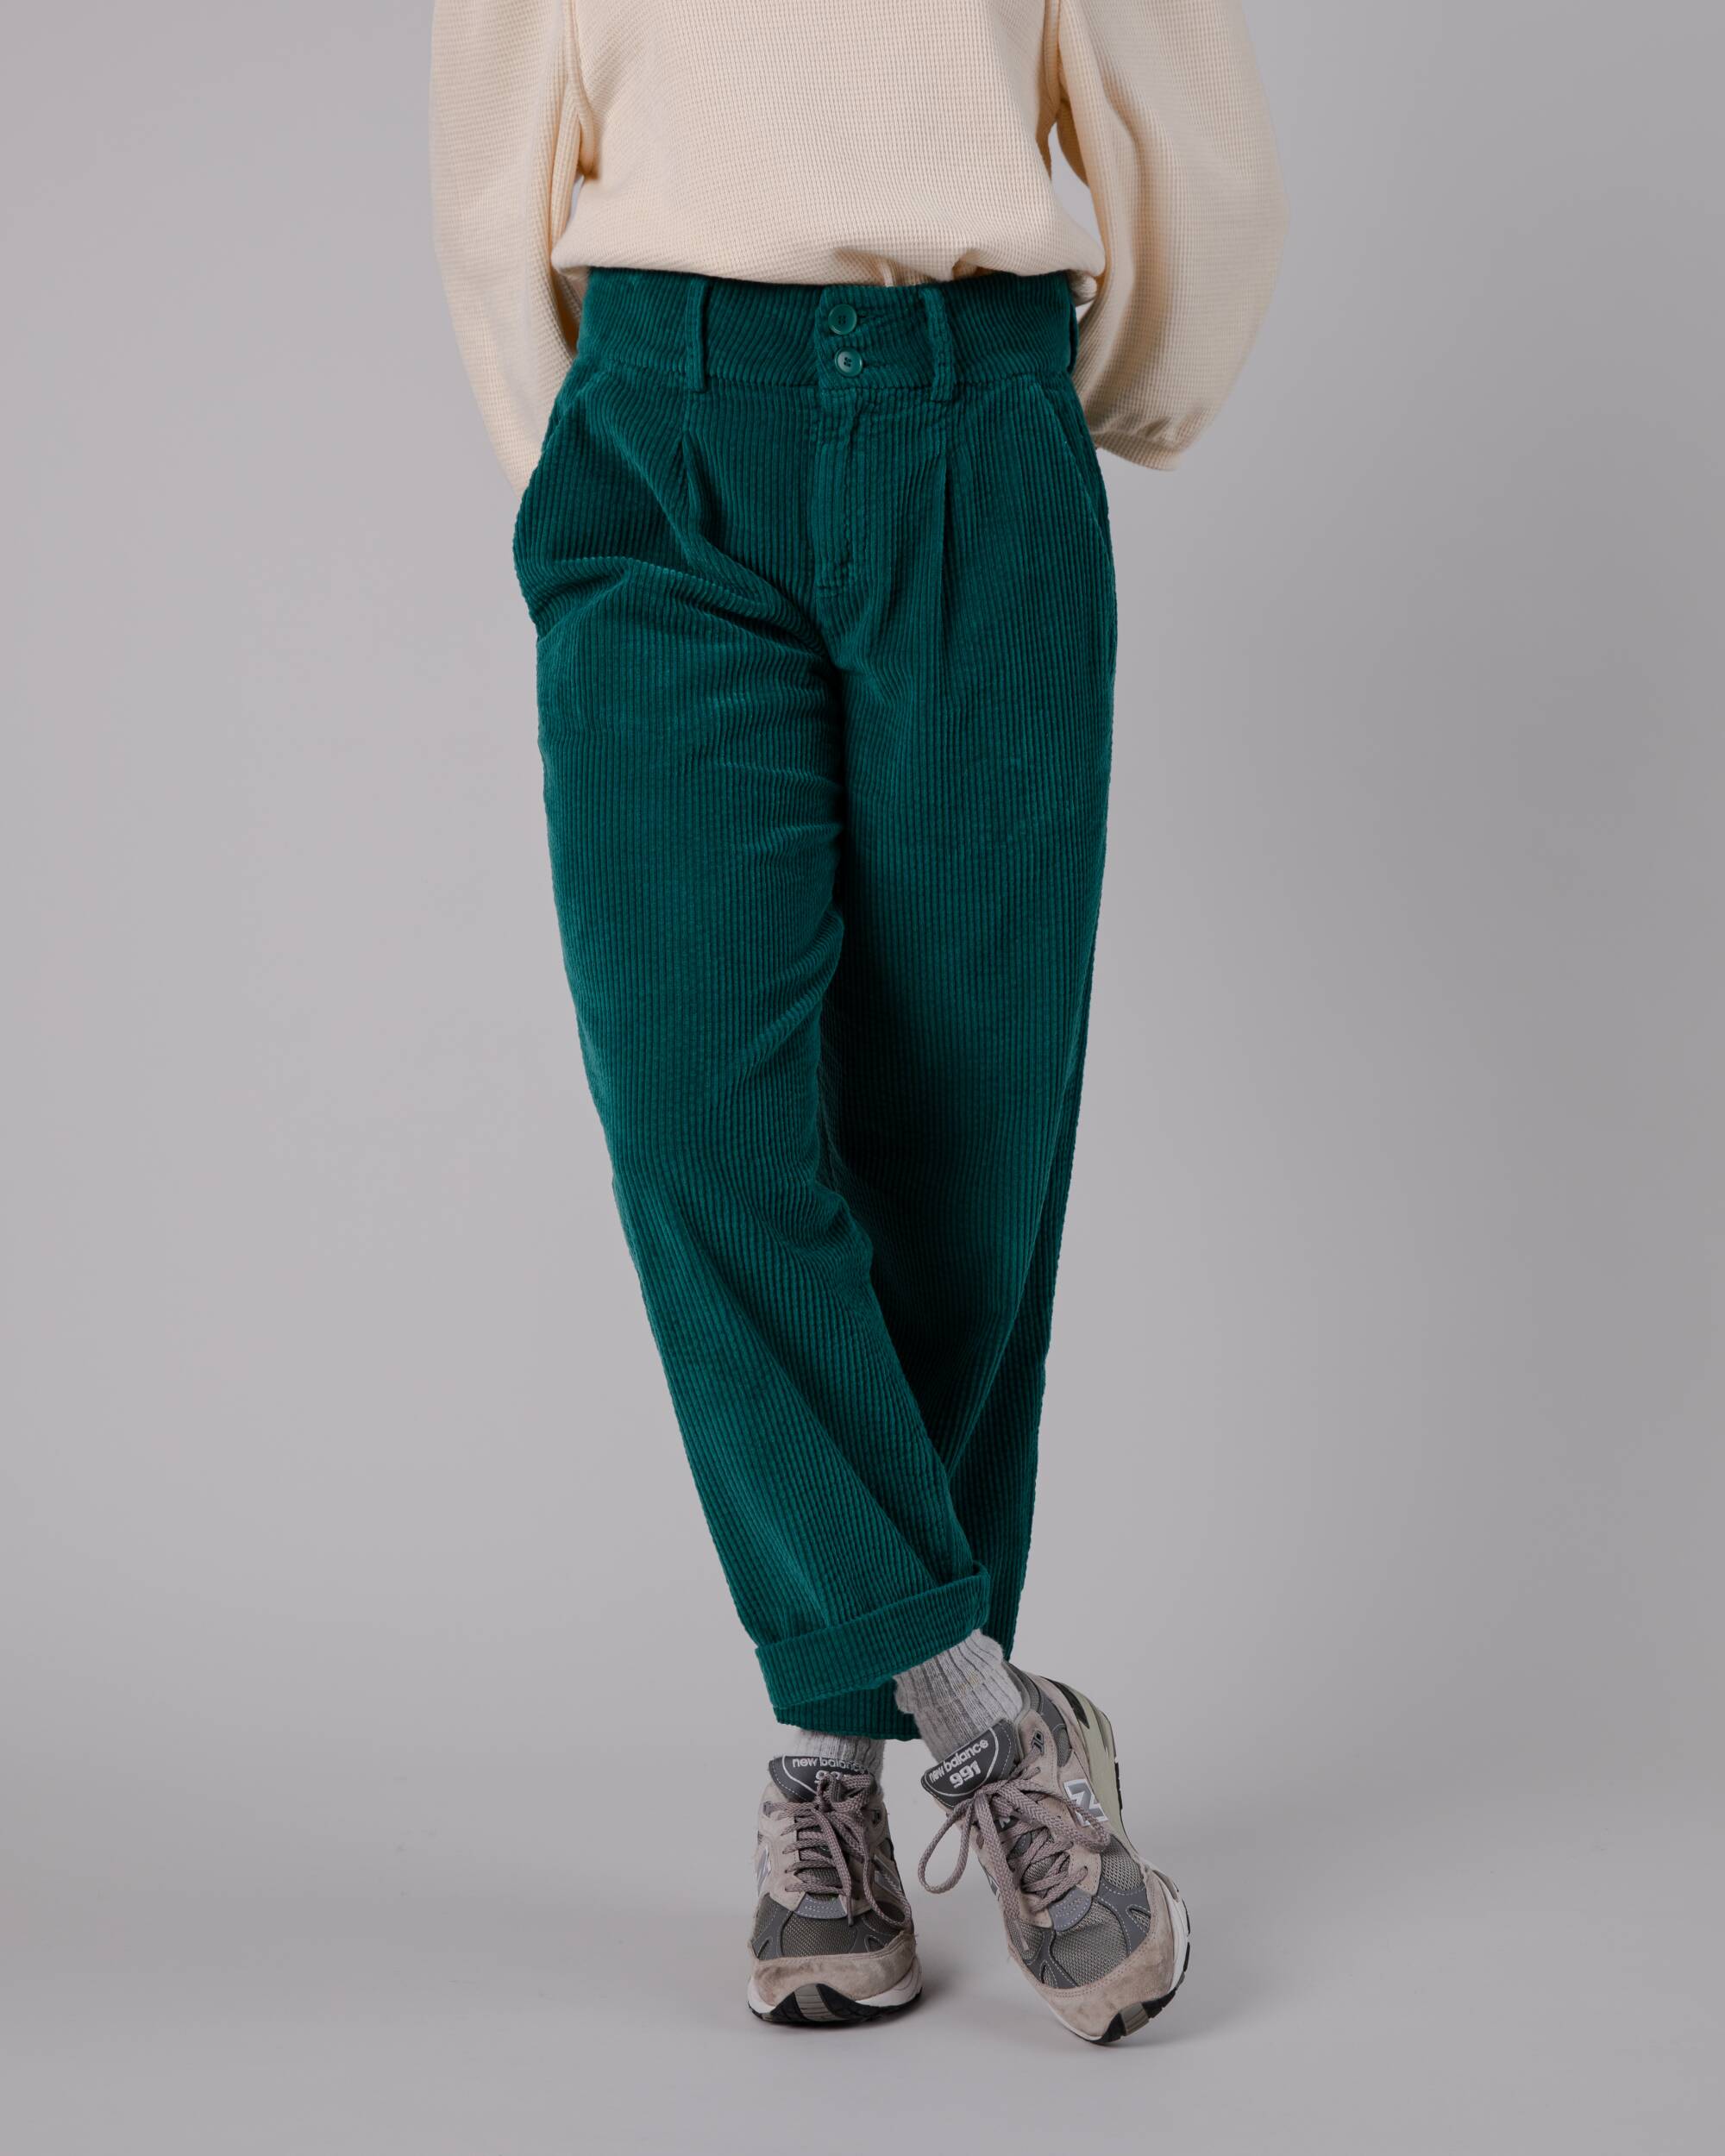 Corduroy pleated trousers in green made from organic cotton by Brava Fabrics